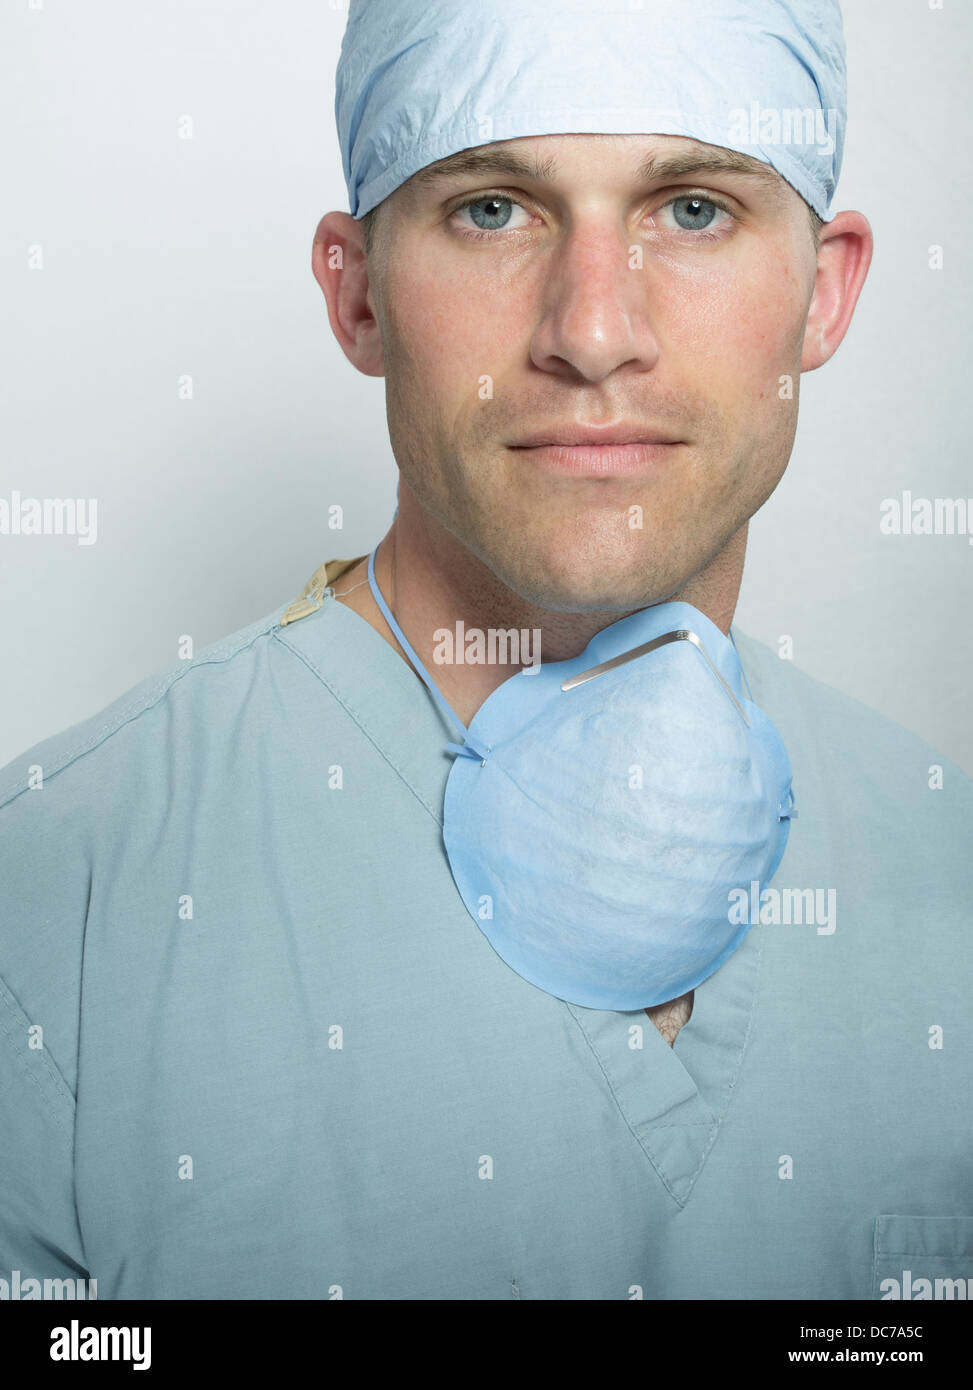 Male doctor / surgeon wearing hat, surgical scrubs and mask. Stock Photo